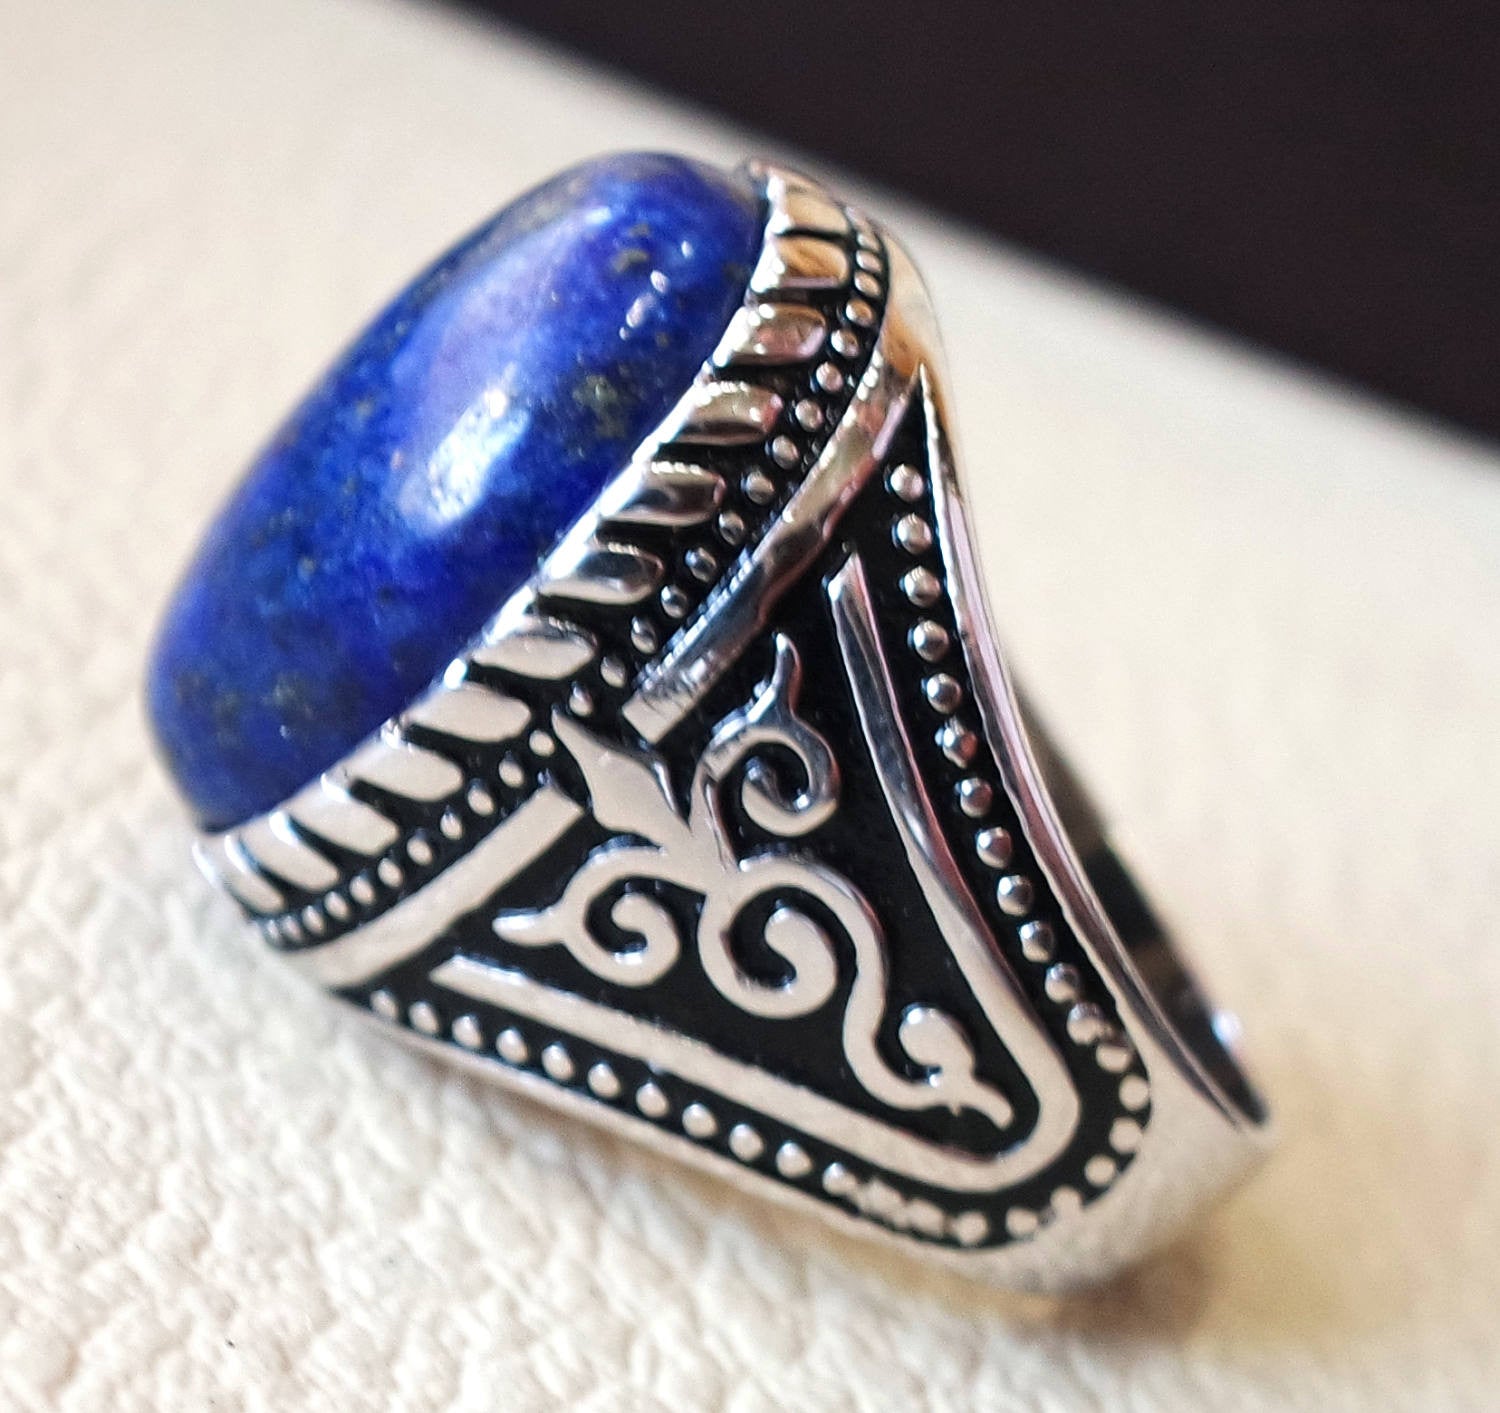 man ring lapis lazuli oval cabochon natural dark blue stone  sterling silver 925 men jewelry all sizes 18 * 13 mm antique middle eastern